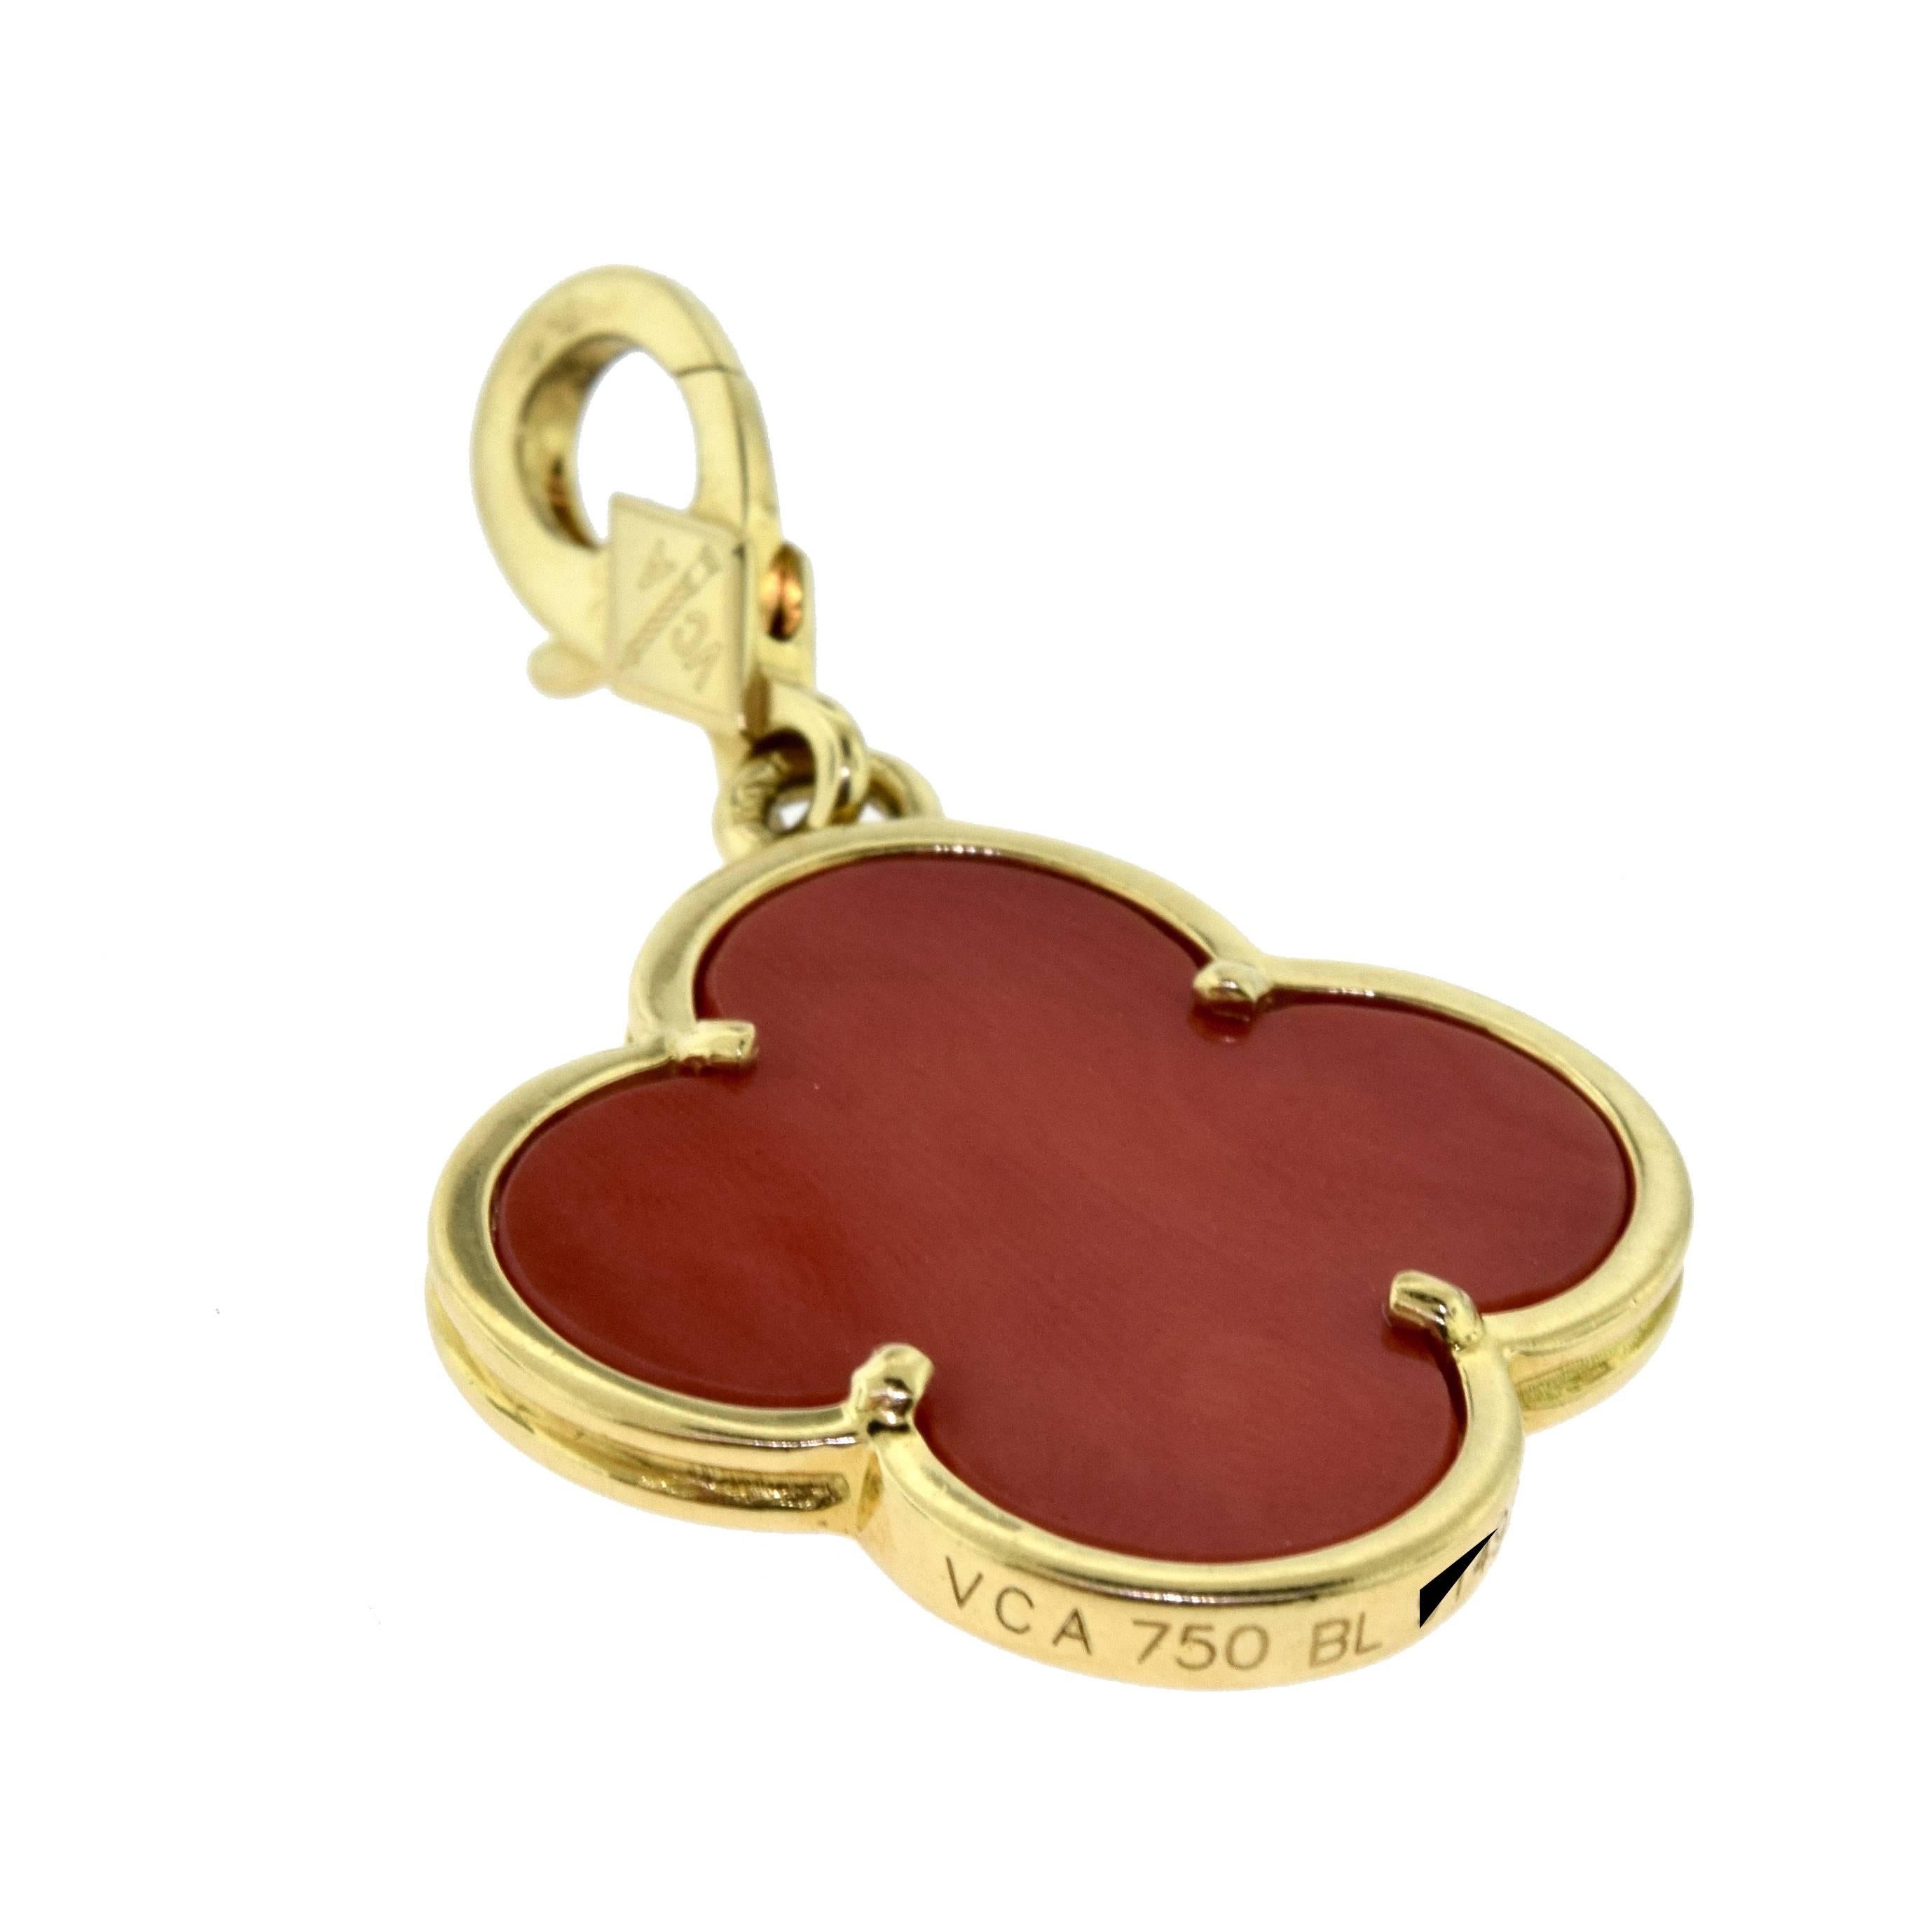 Metal: 18k Yellow Gold
Stone: Red Coral
Total Item Weight (g): 4.4
Measurement: 22.20 x 19.40 mm
Thickness: 3.37 mm
Hallmark: VCA Au750 Serial No.
